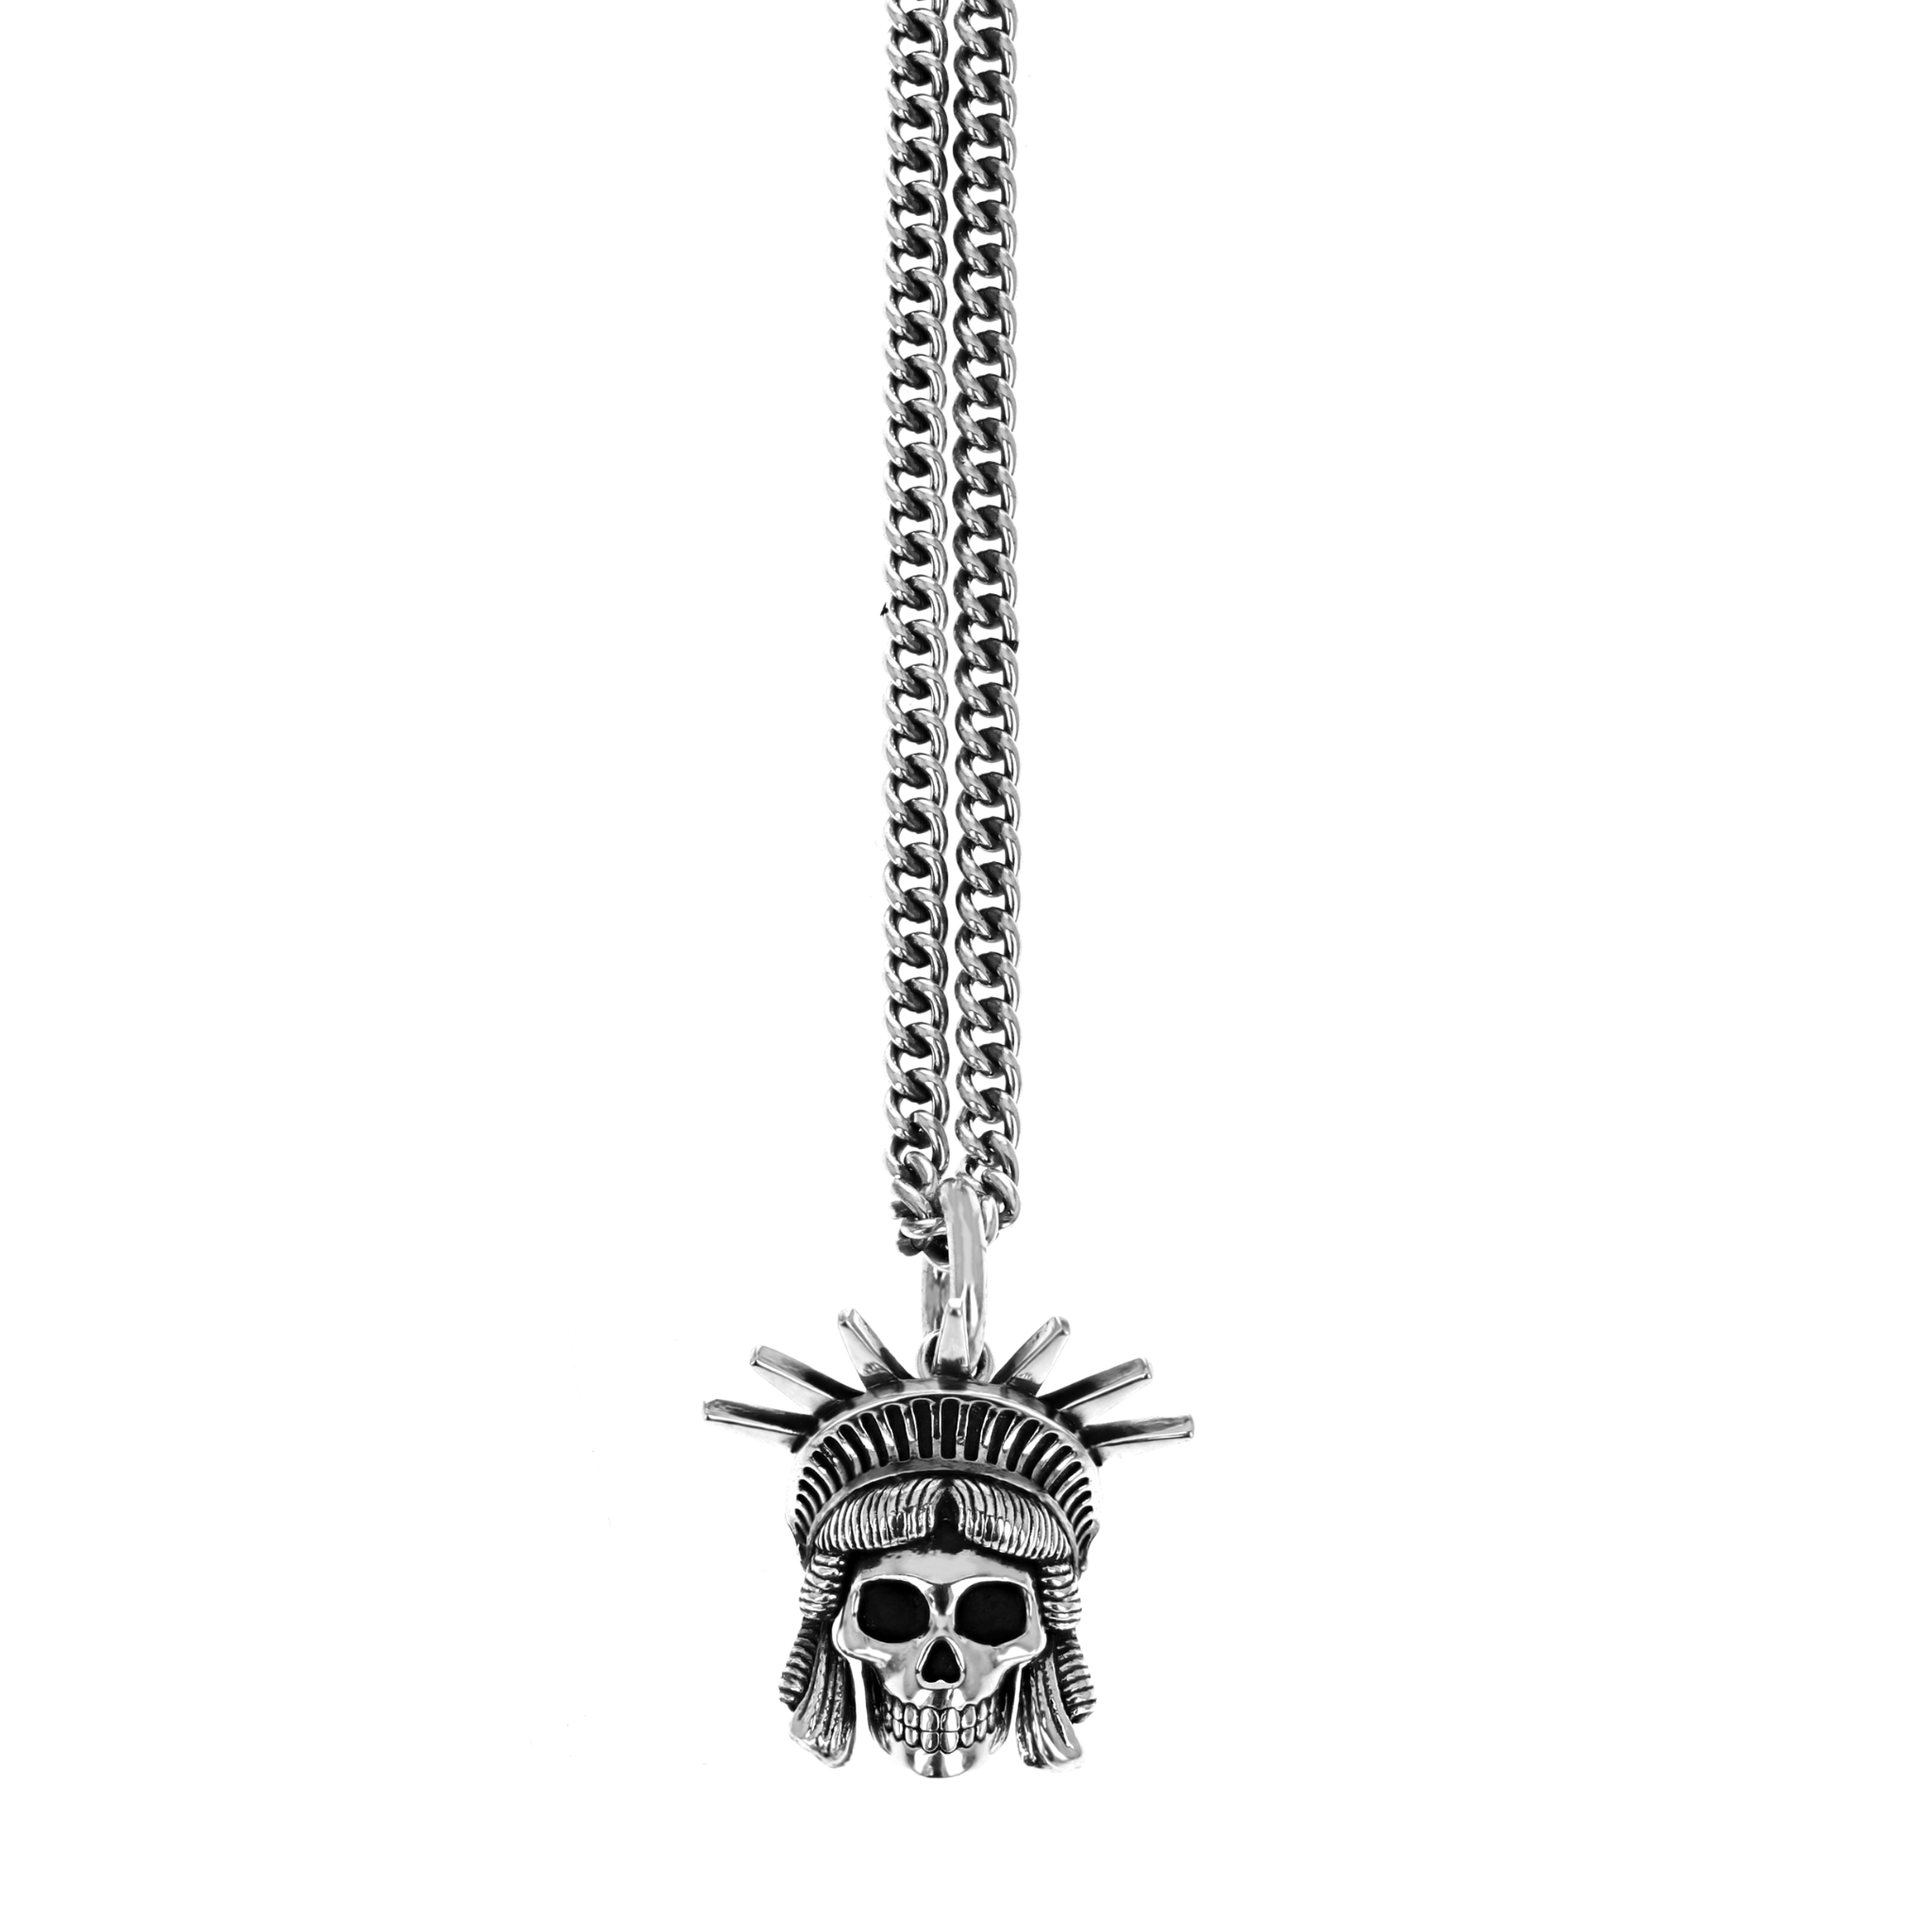 Product shot of skull pendant with statue of liberty crown on head